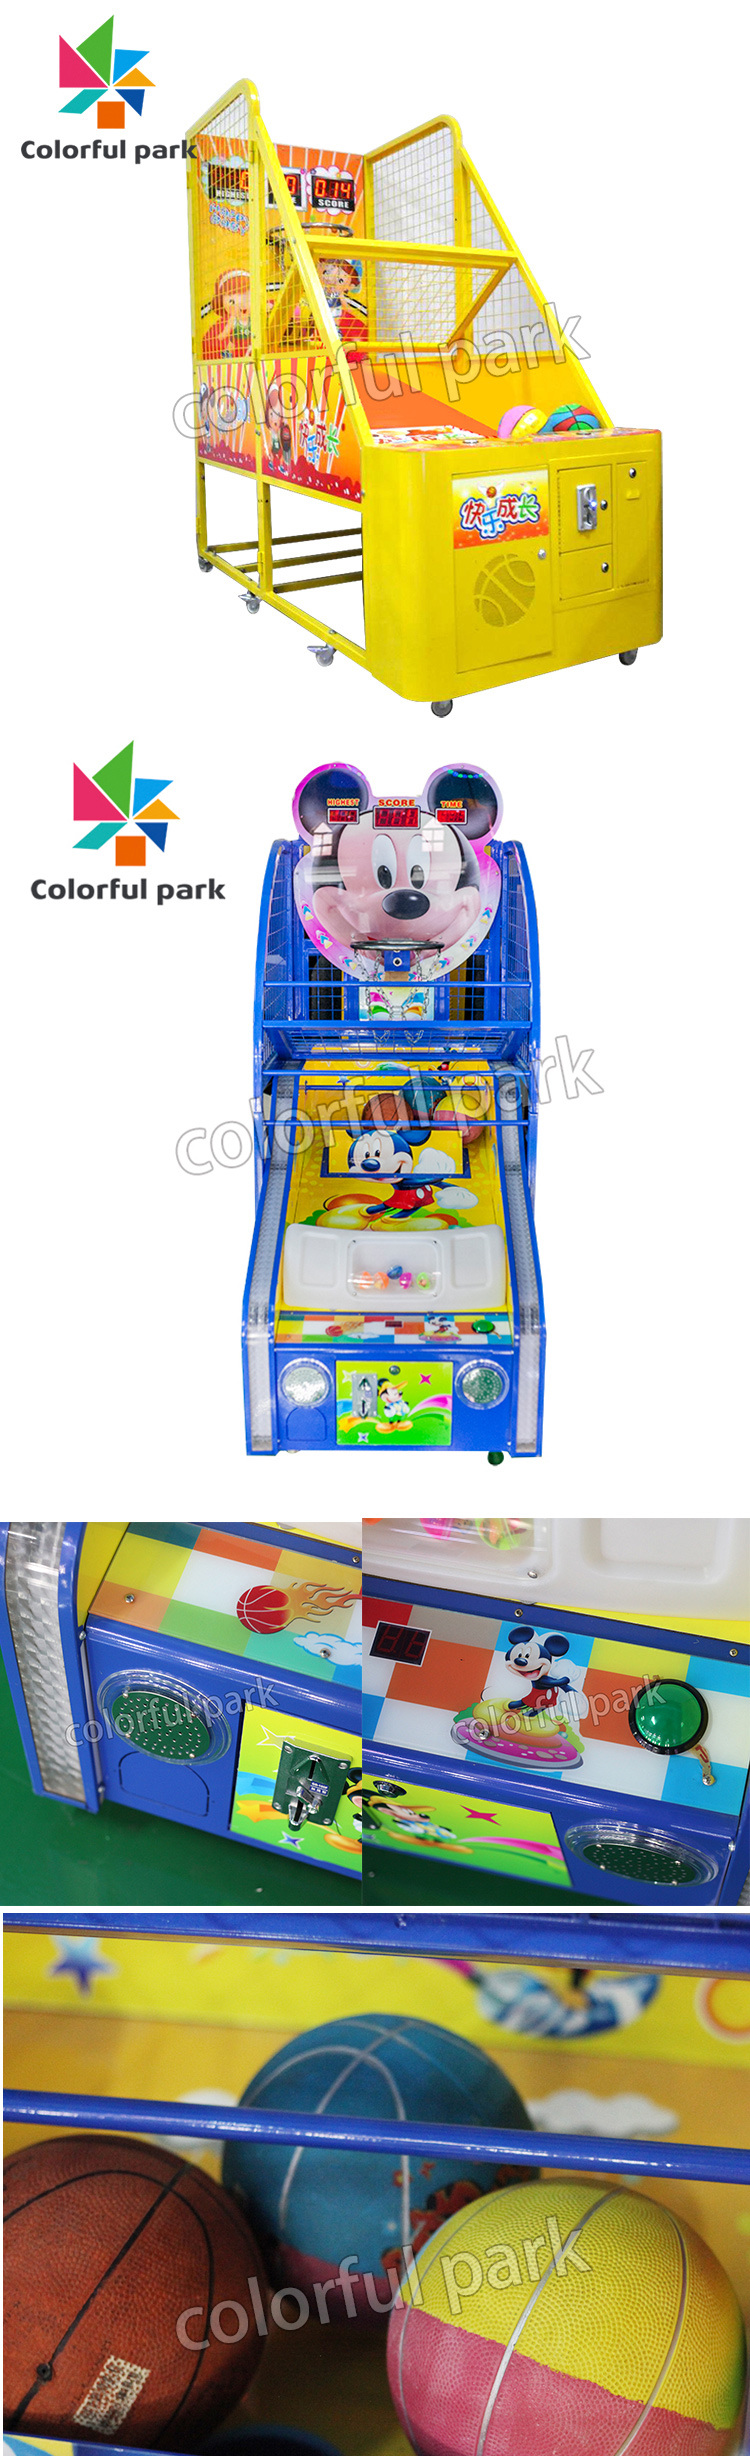 Colorful Park Coin Operated Indoor Playground Kids Basketball Game Game Machine Vending Machine